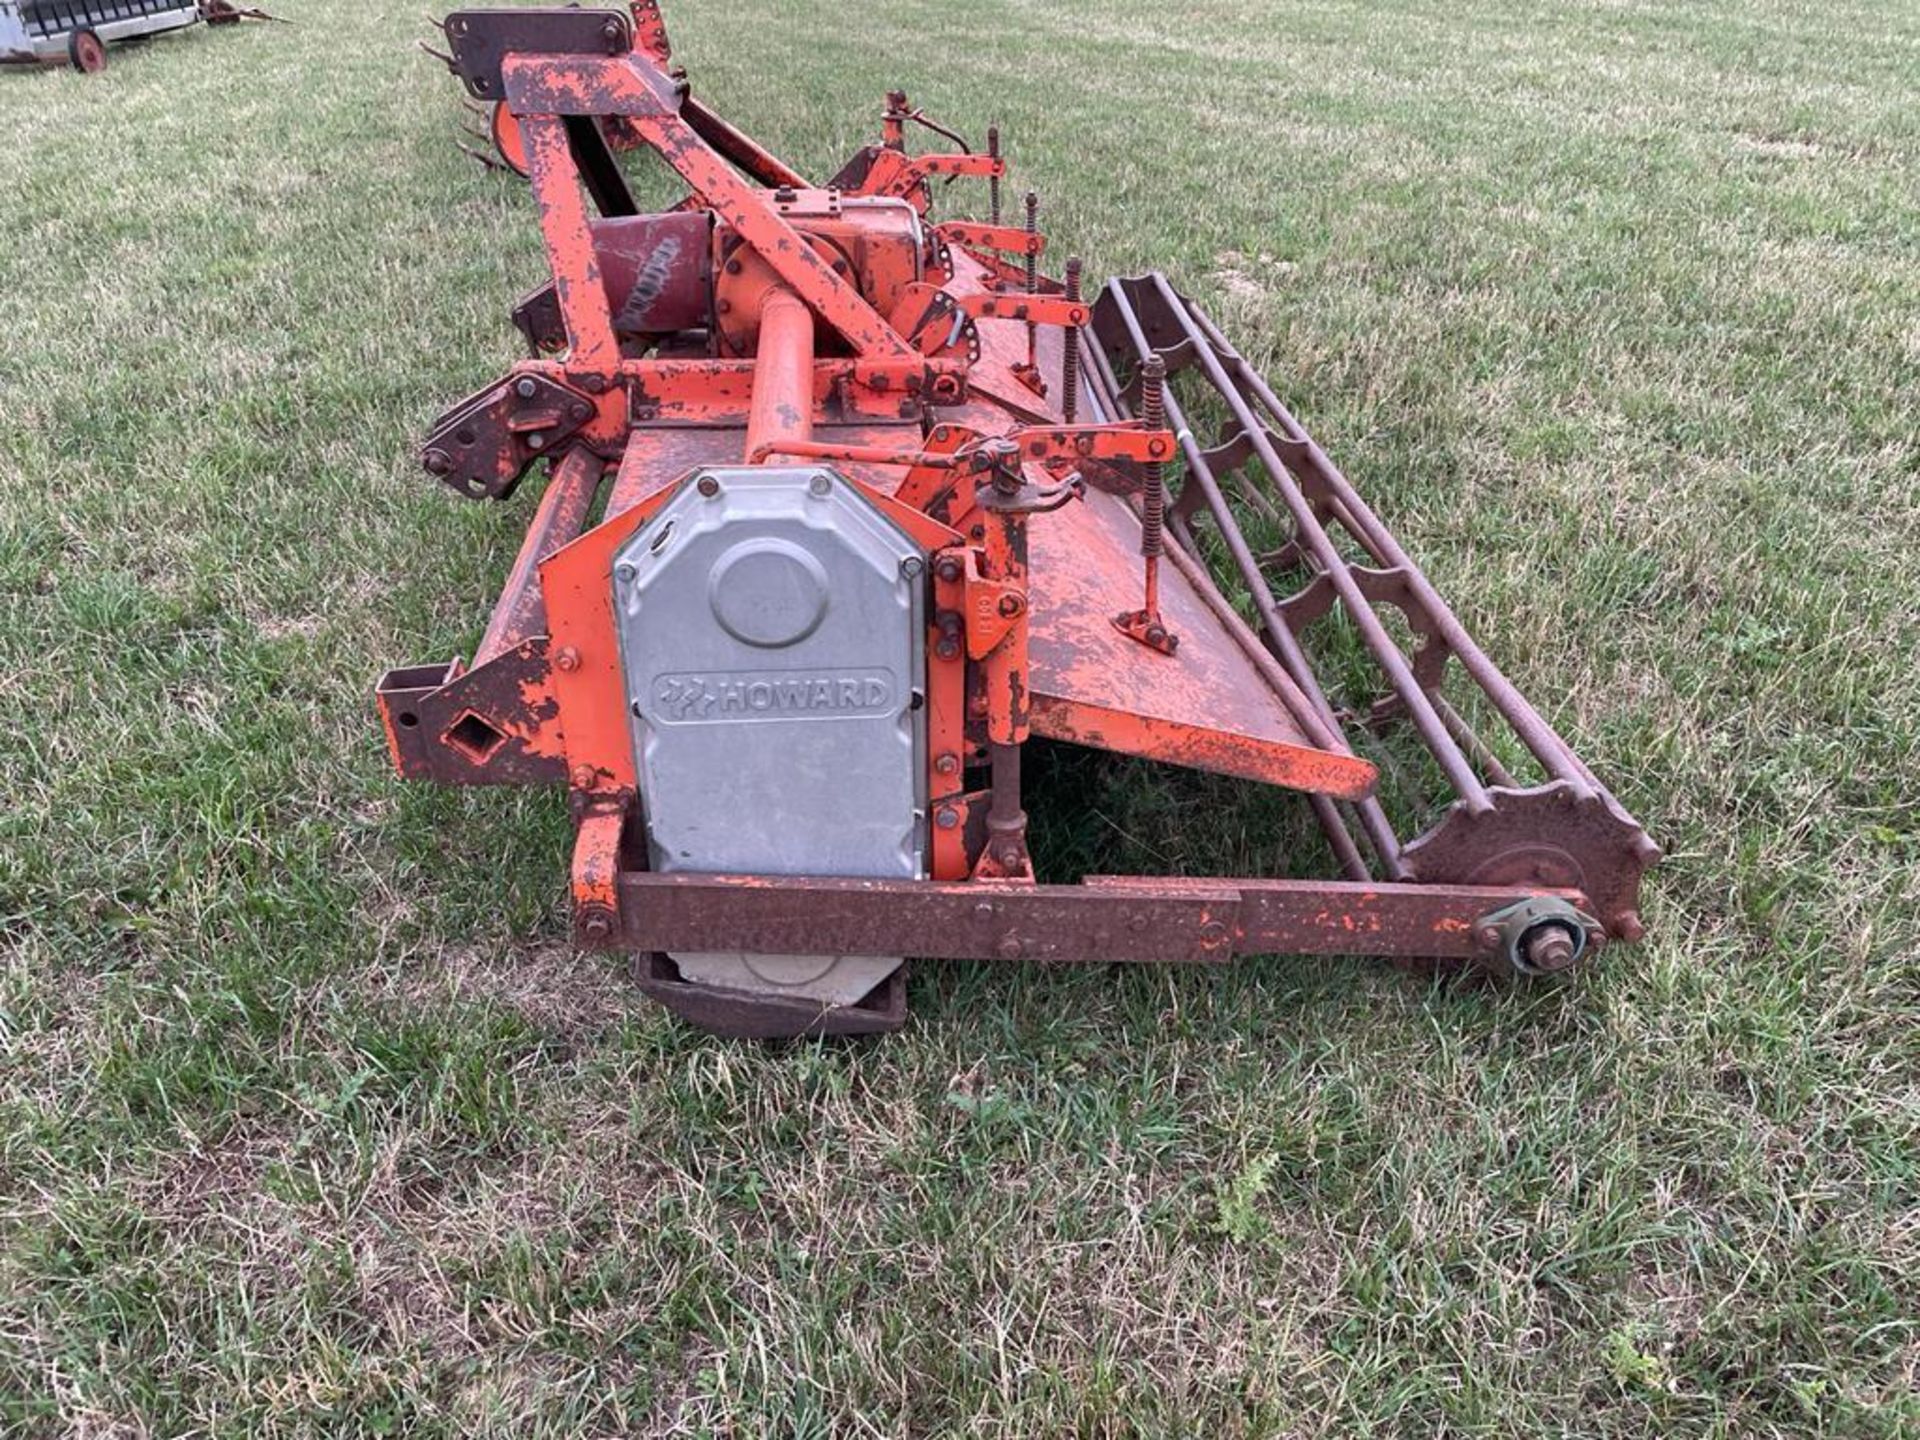 Howard HB100 8' 9" rotavator with rear crumbler, PTO driven, linkage mounted. Serial No: 802A4581 ​​ - Image 8 of 10